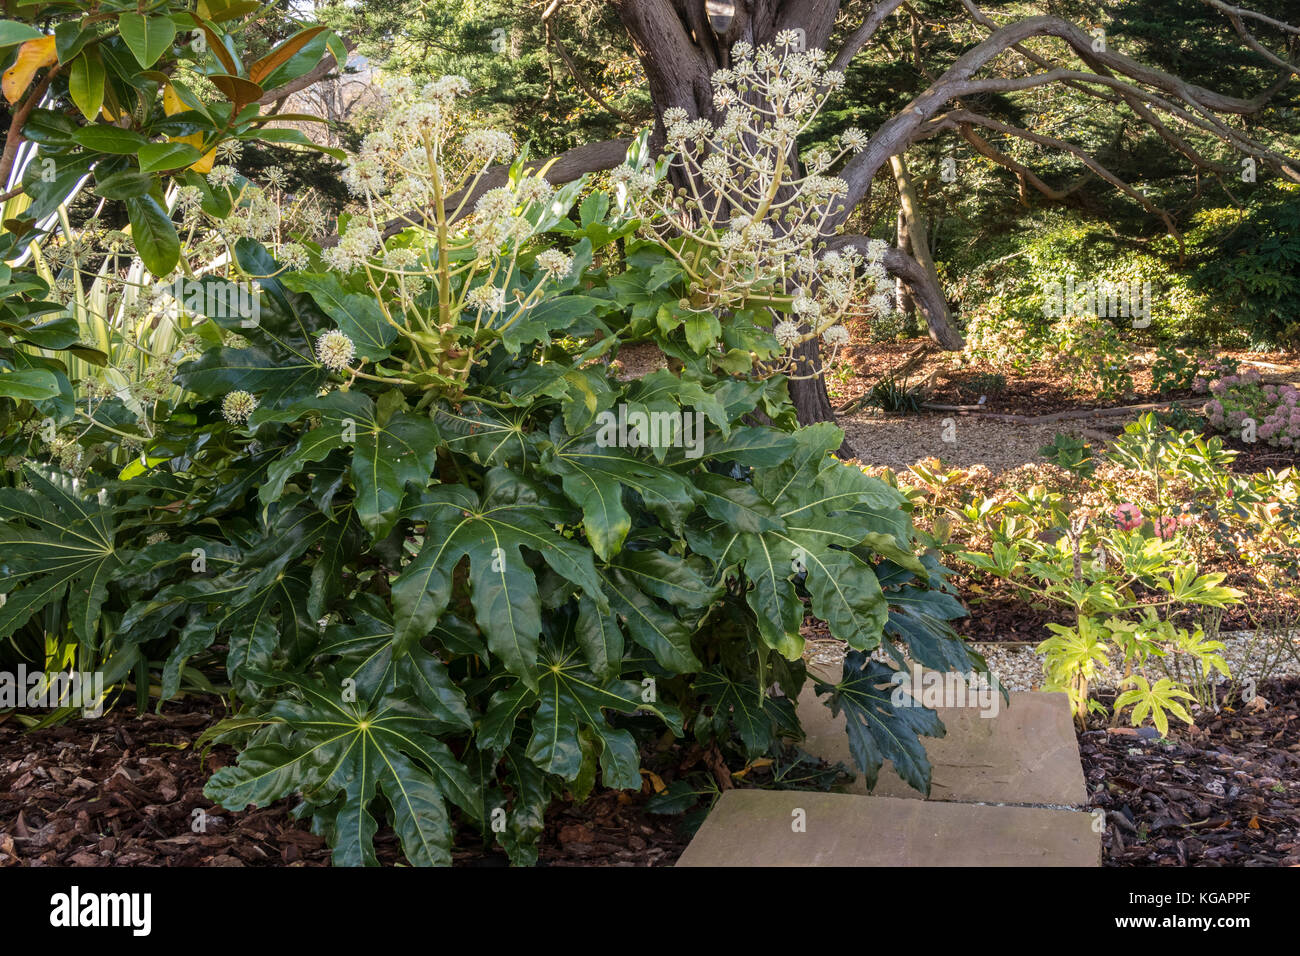 Fatsia Japonica in full flower, November 2017 in a Devon garden, softening the edges of a set of stone steps. Stock Photo